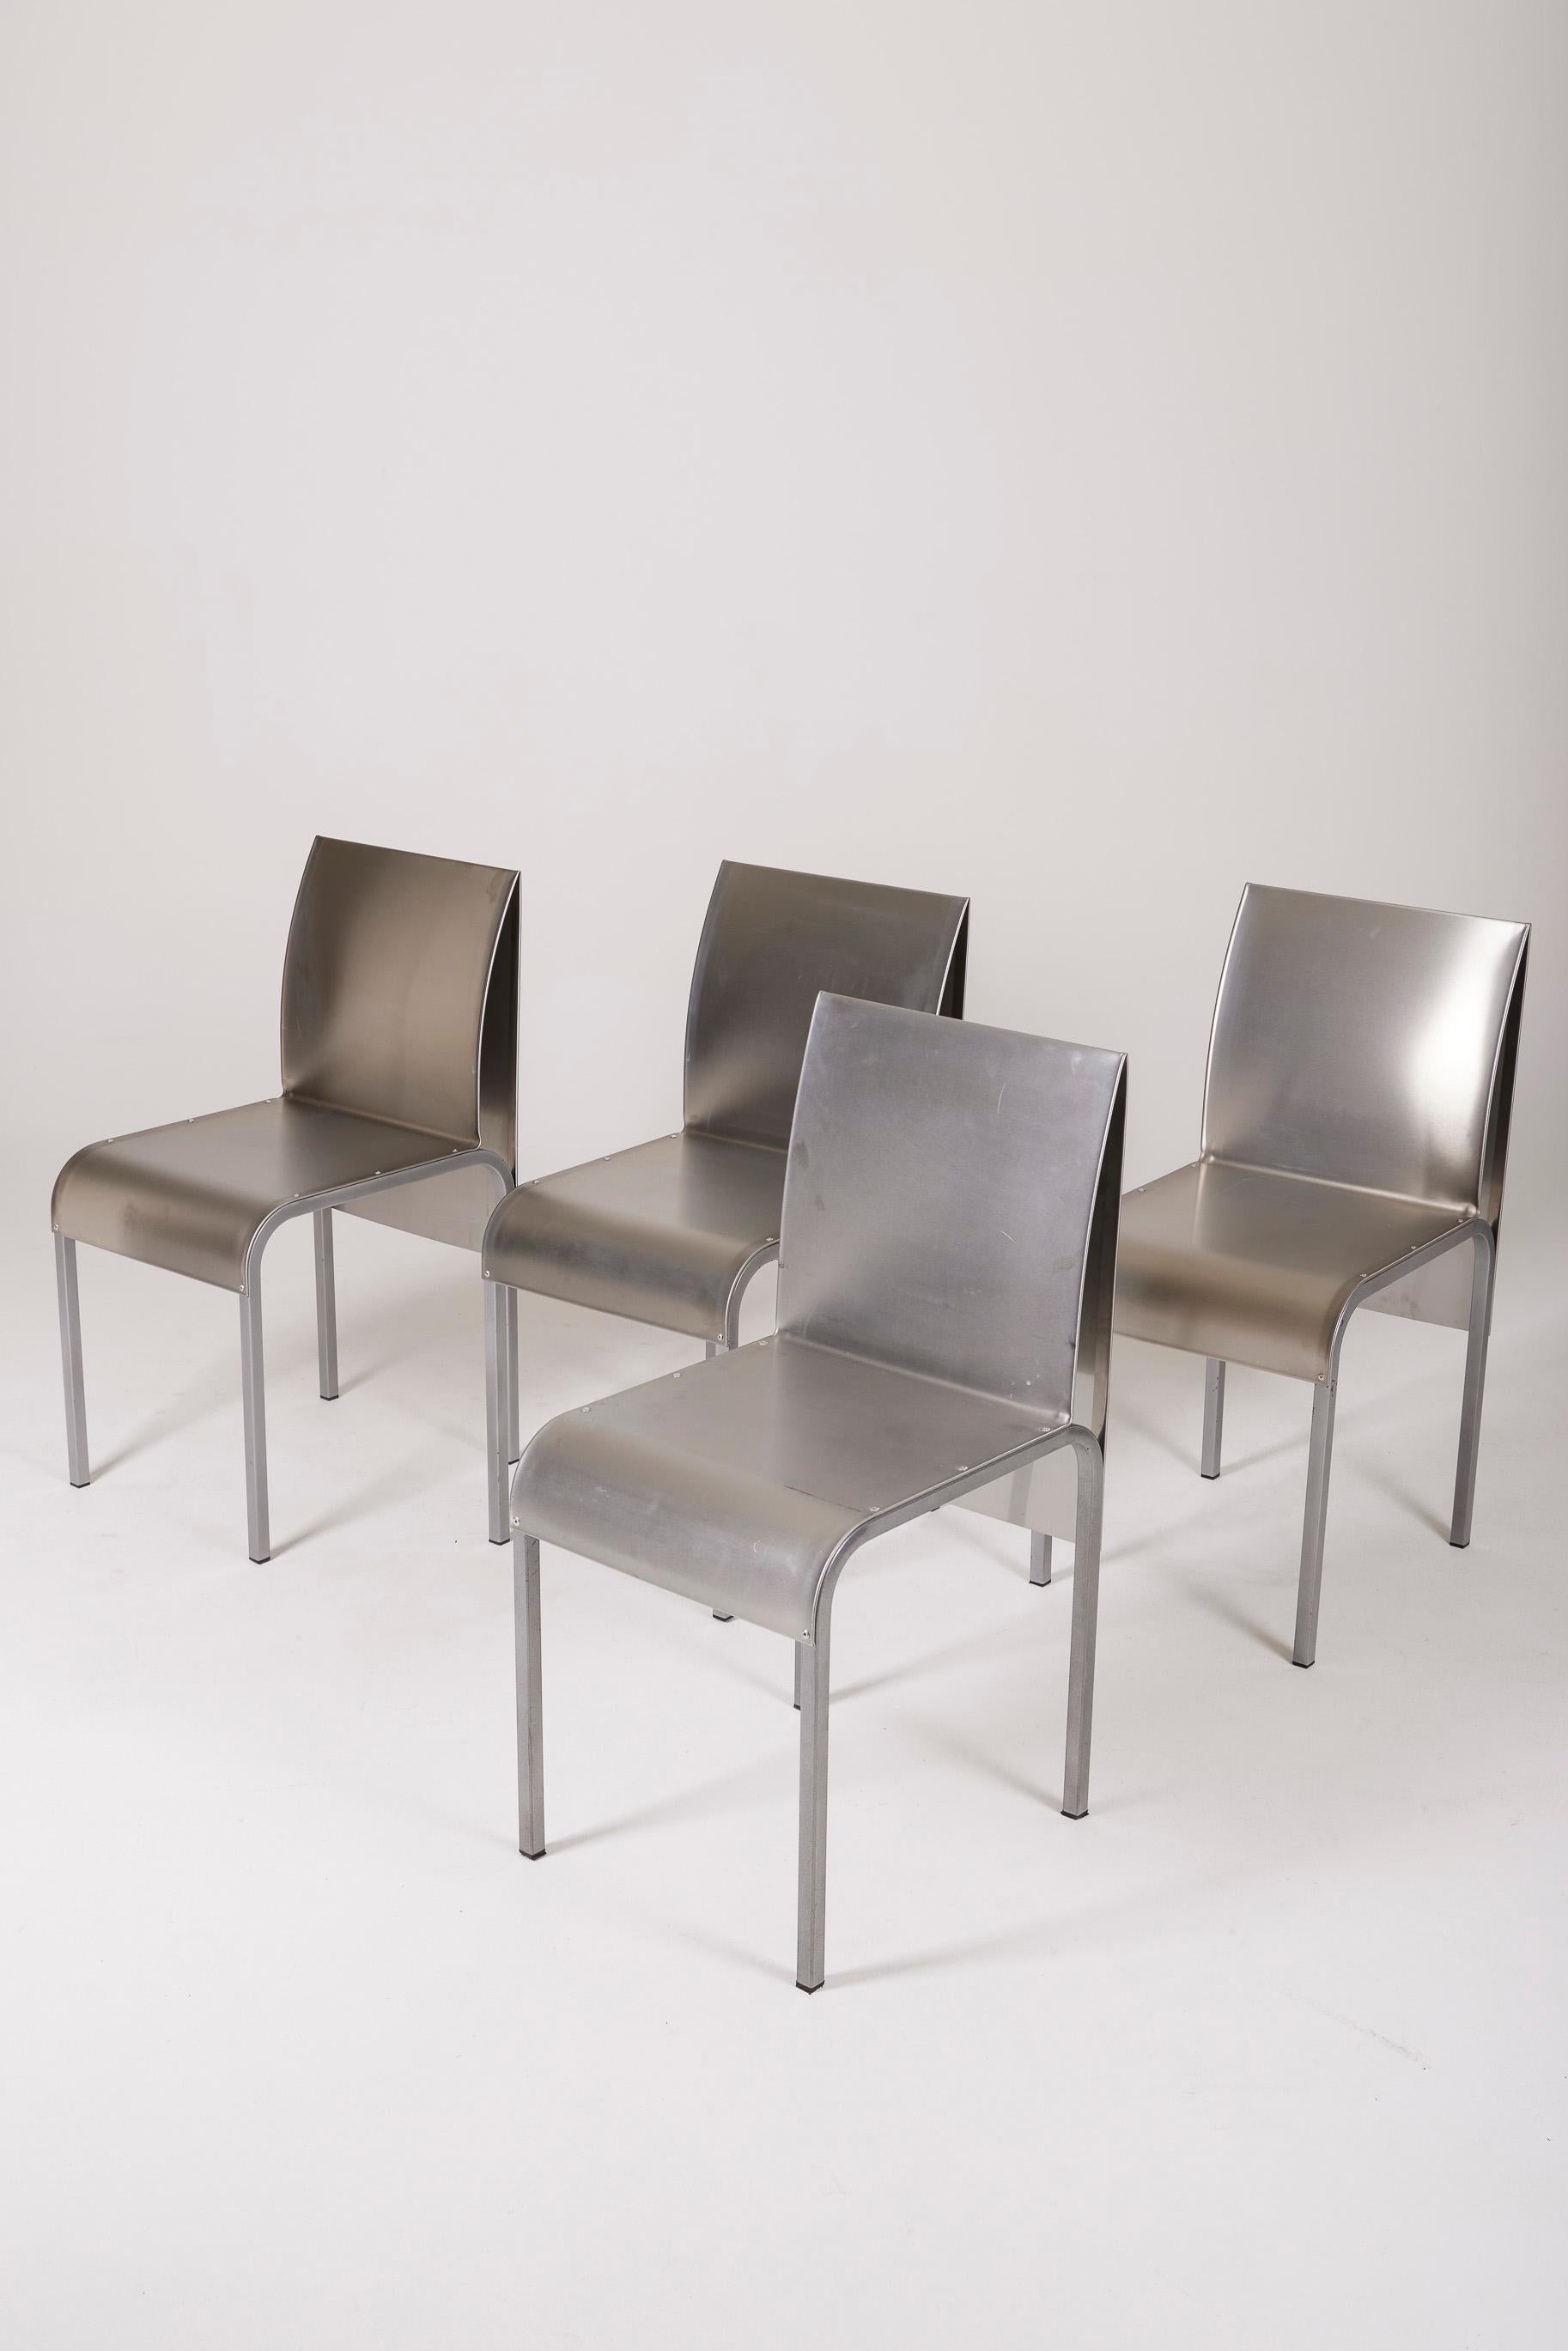 Set of folded aluminum dining table chairs from the 90s. Slight signs of age. These chairs will perfectly complement furniture from the 70s and 80s by designers such as Pierre Paulin, Afra and Tobia Scarpa, Michel Ducaroy, Philippe Starck, Martin